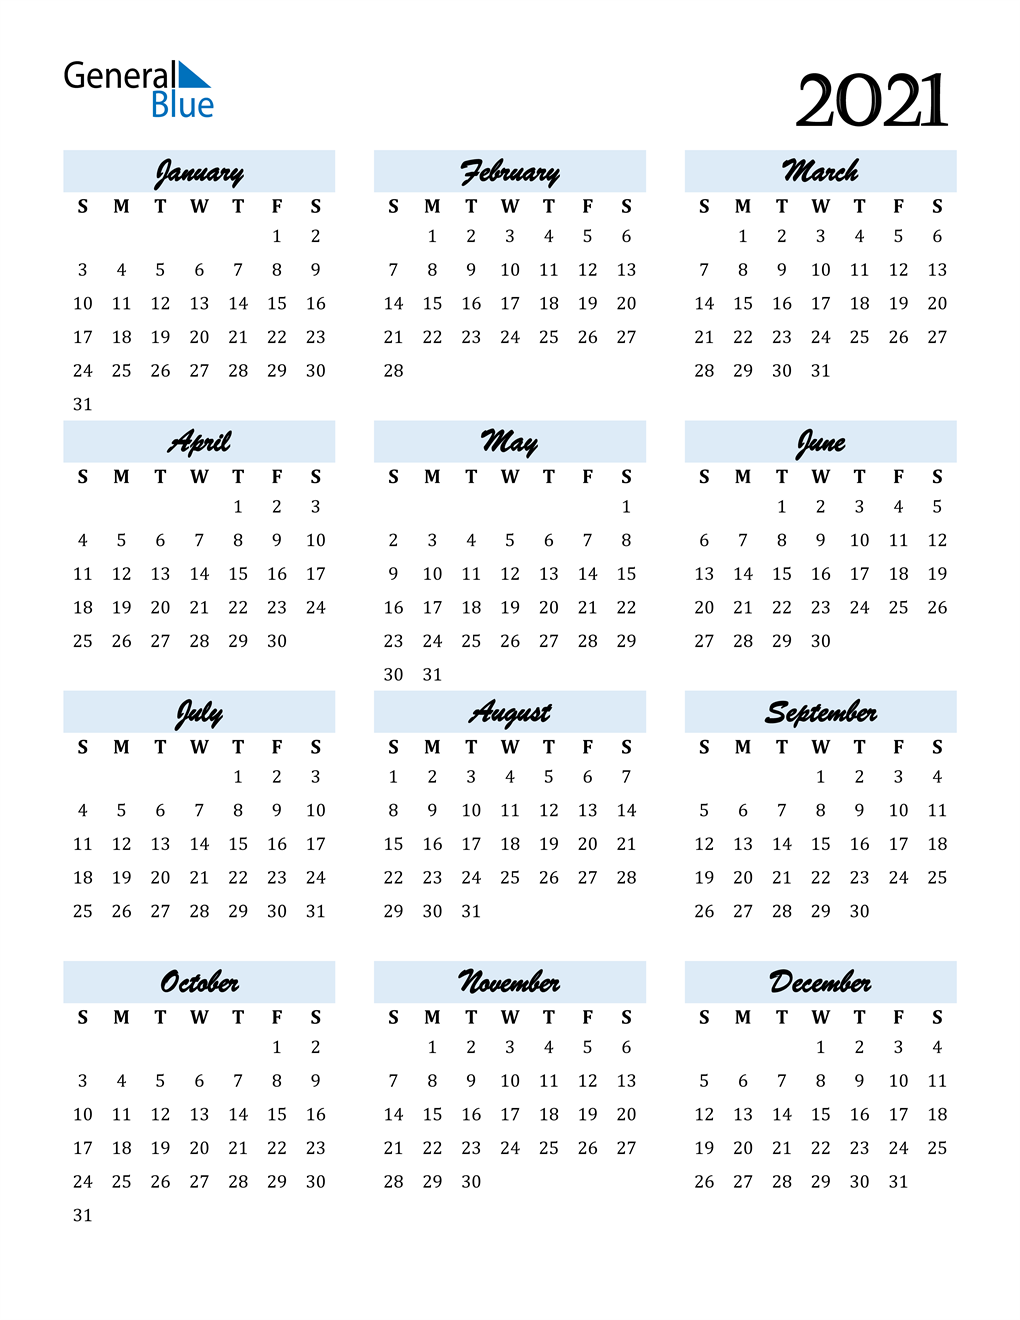 February 2021 Calendar Wallpapers Wallpaper Cave February 2021 calendar with holidays available for print or download. february 2021 calendar wallpapers